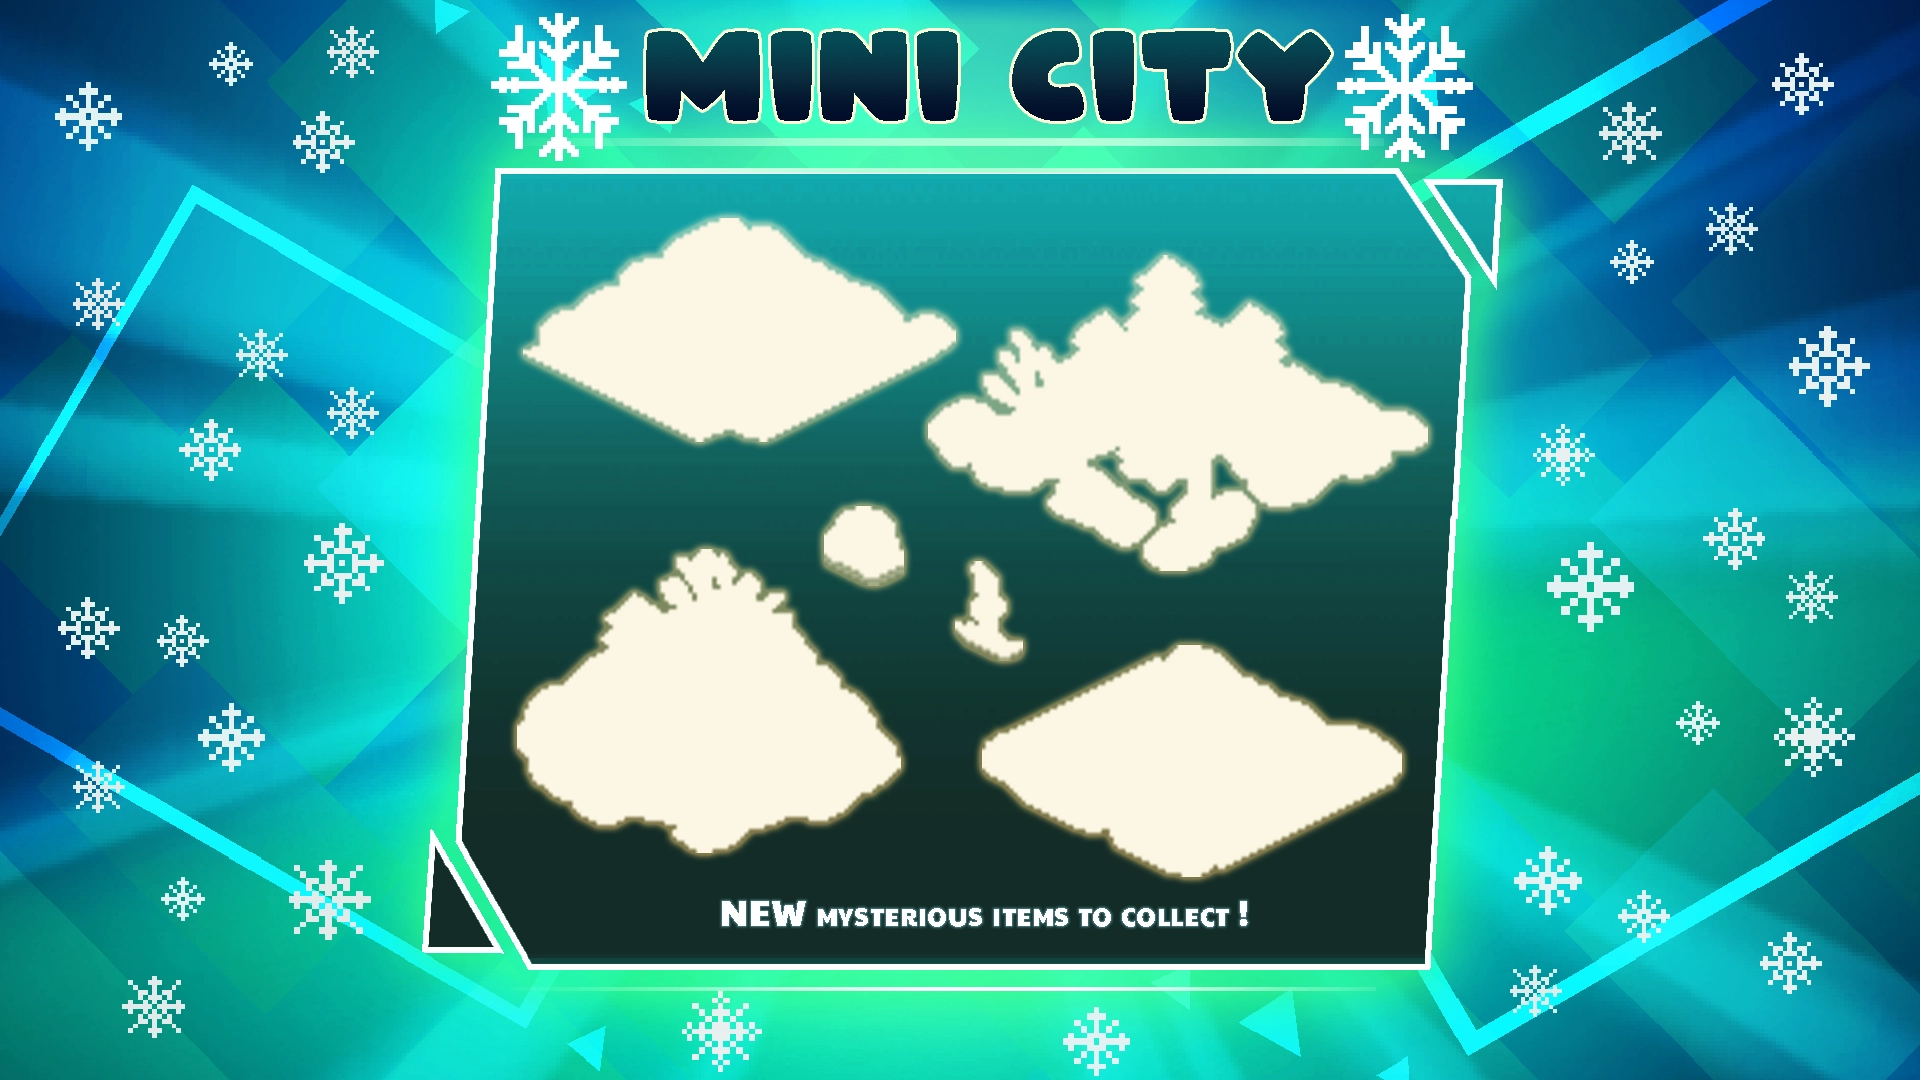 PewDiePie's Tuber Simulator Mini City Holiday Crossover Update: A festive cityscape adorned with seasonal decorations and special in-game events.